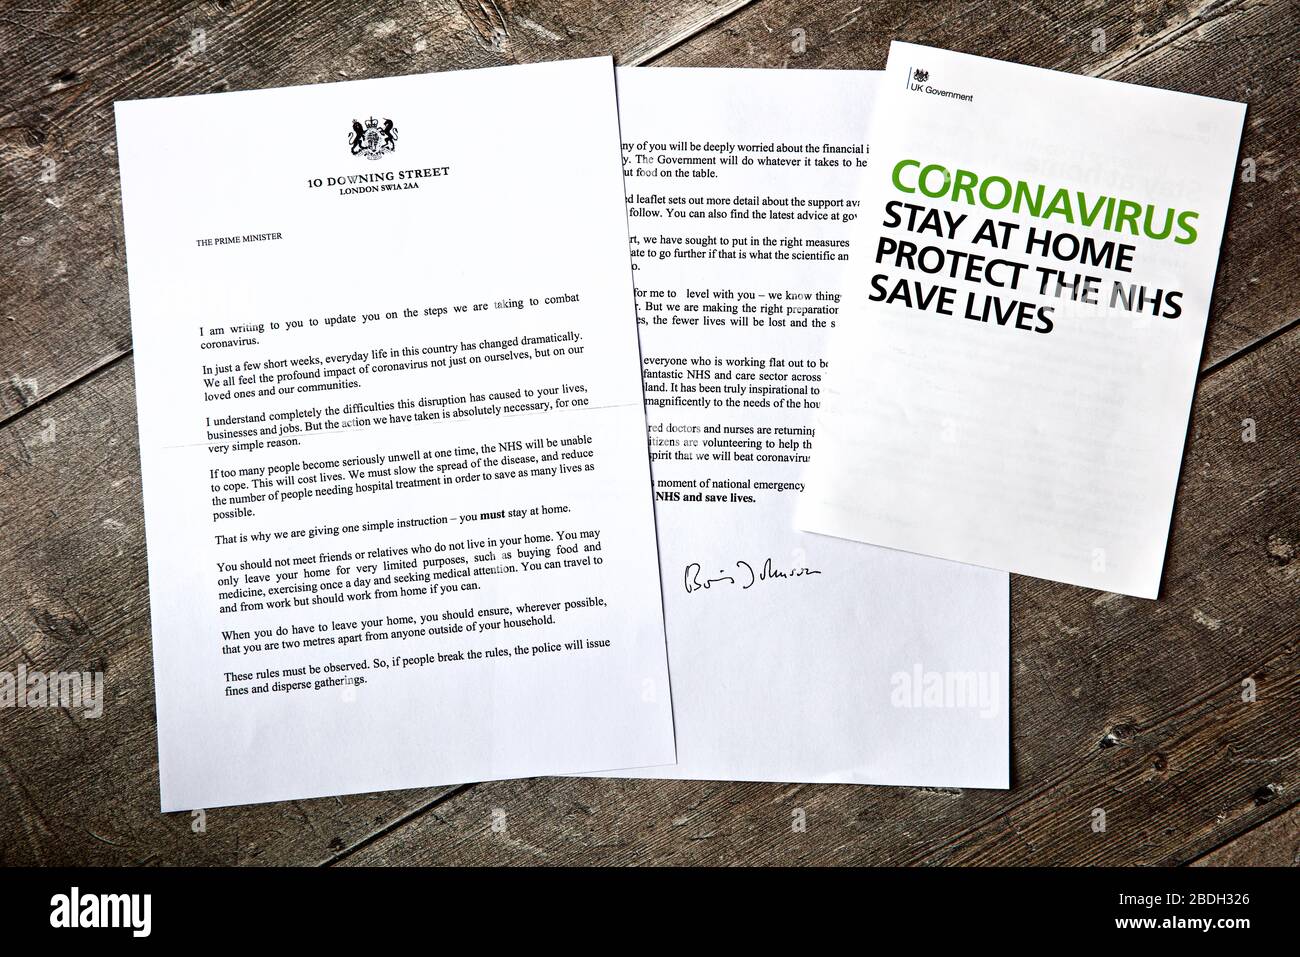 Coronavirus - Boris Johnson letter to the nation giving advice to protect yourself and the NHS Stock Photo